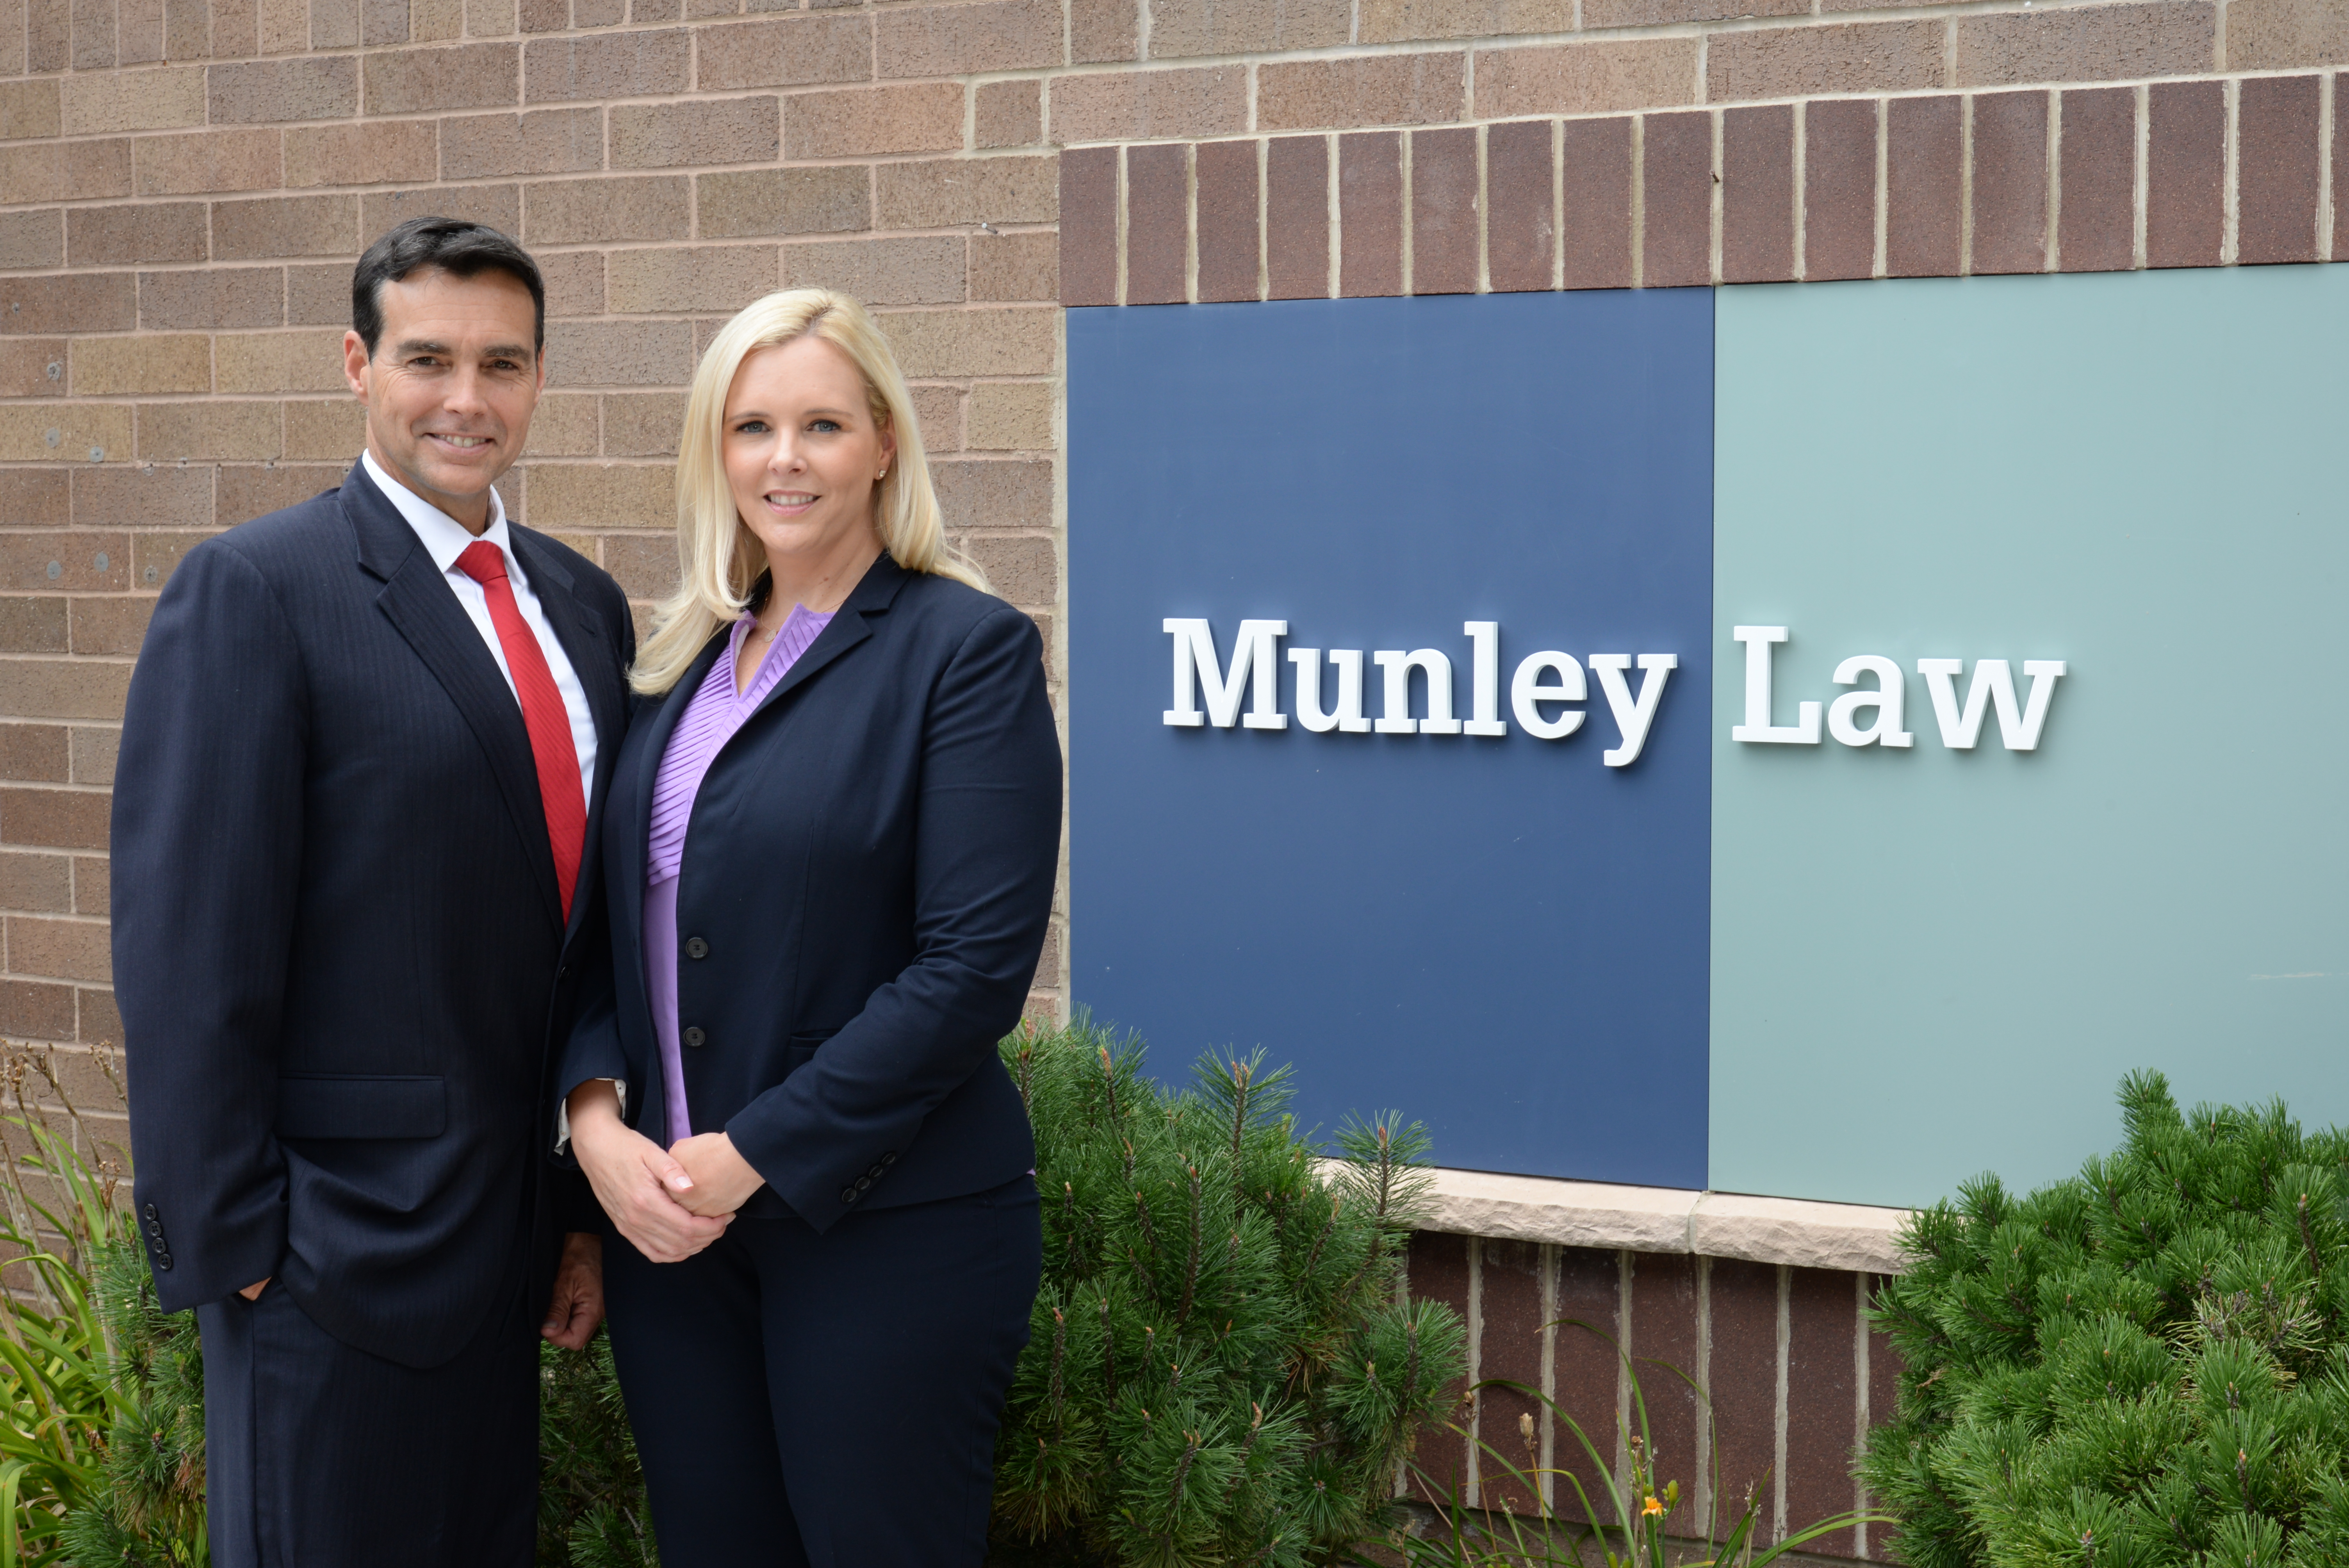 Top Rated Philadelphia Workers' Compensation Lawyer Munley Law